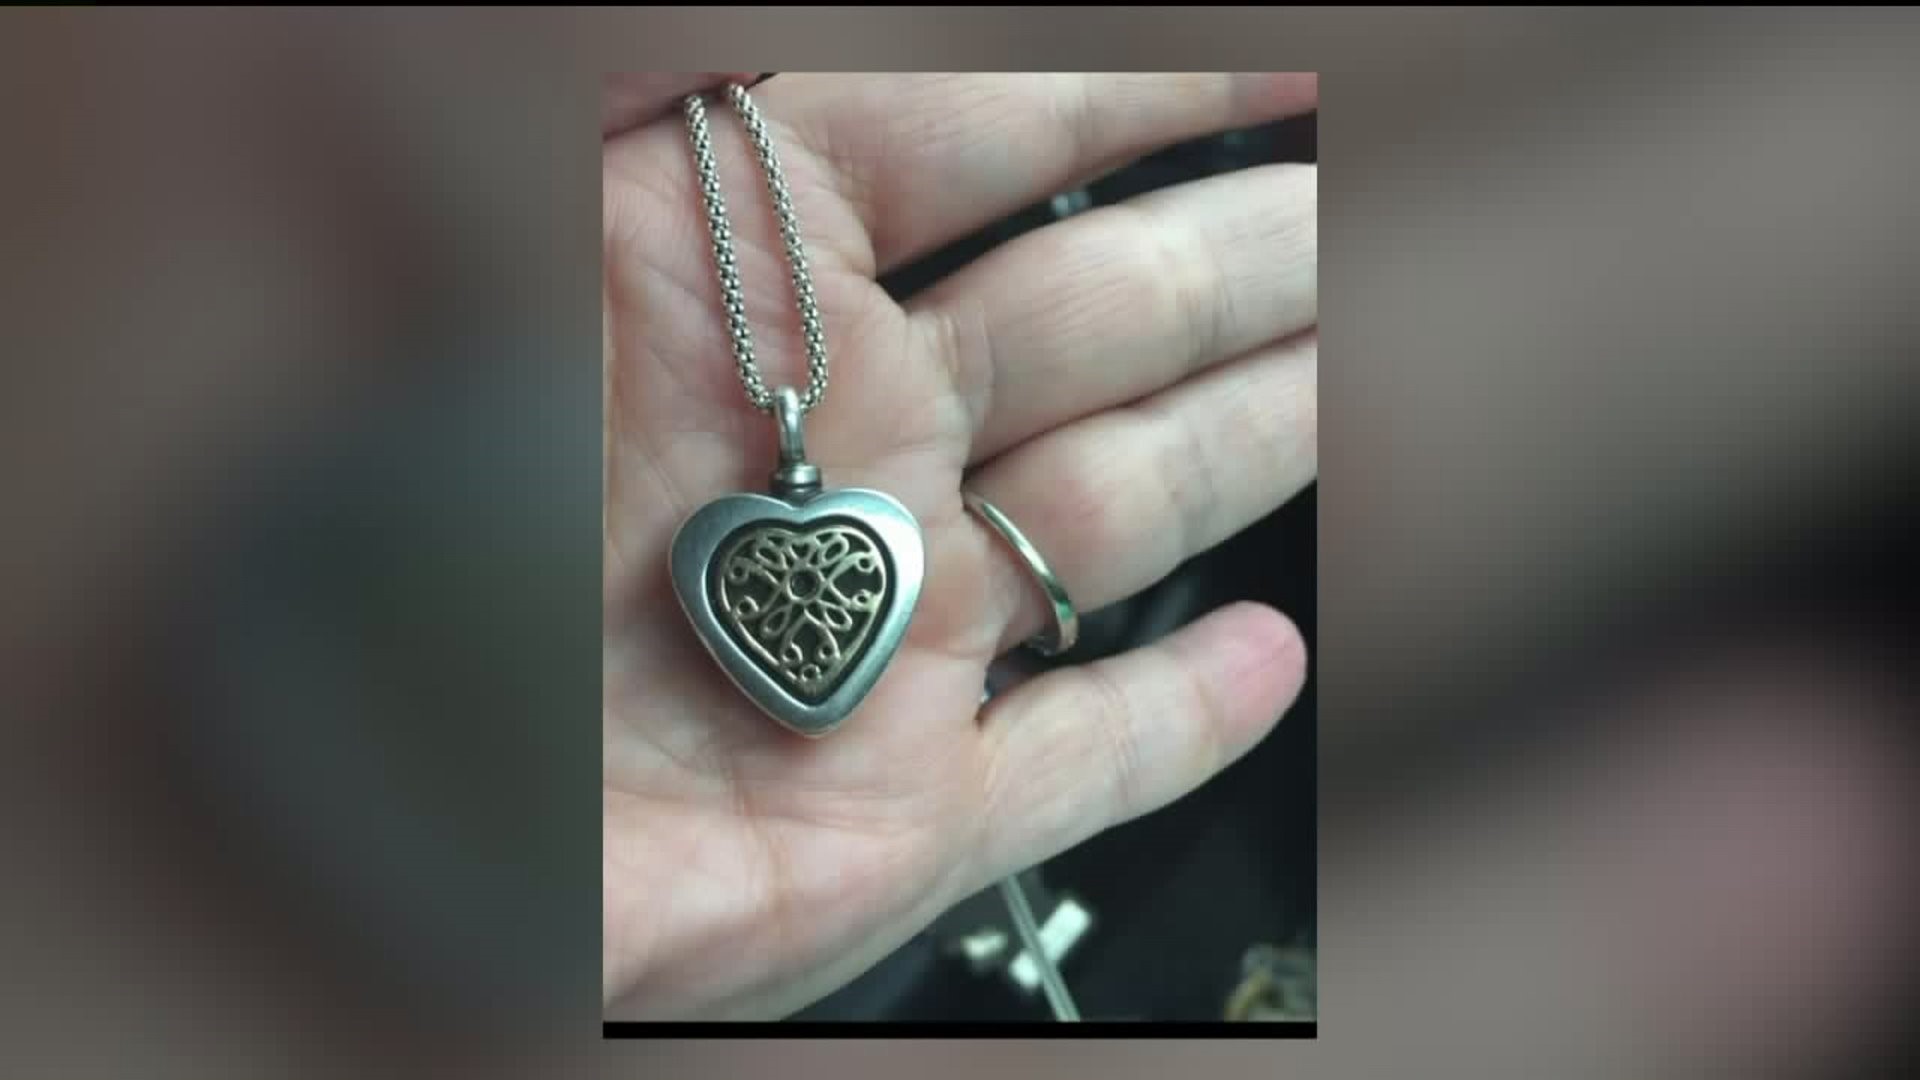 Mom Looking for Missing Necklace Containing her Son's Ashes